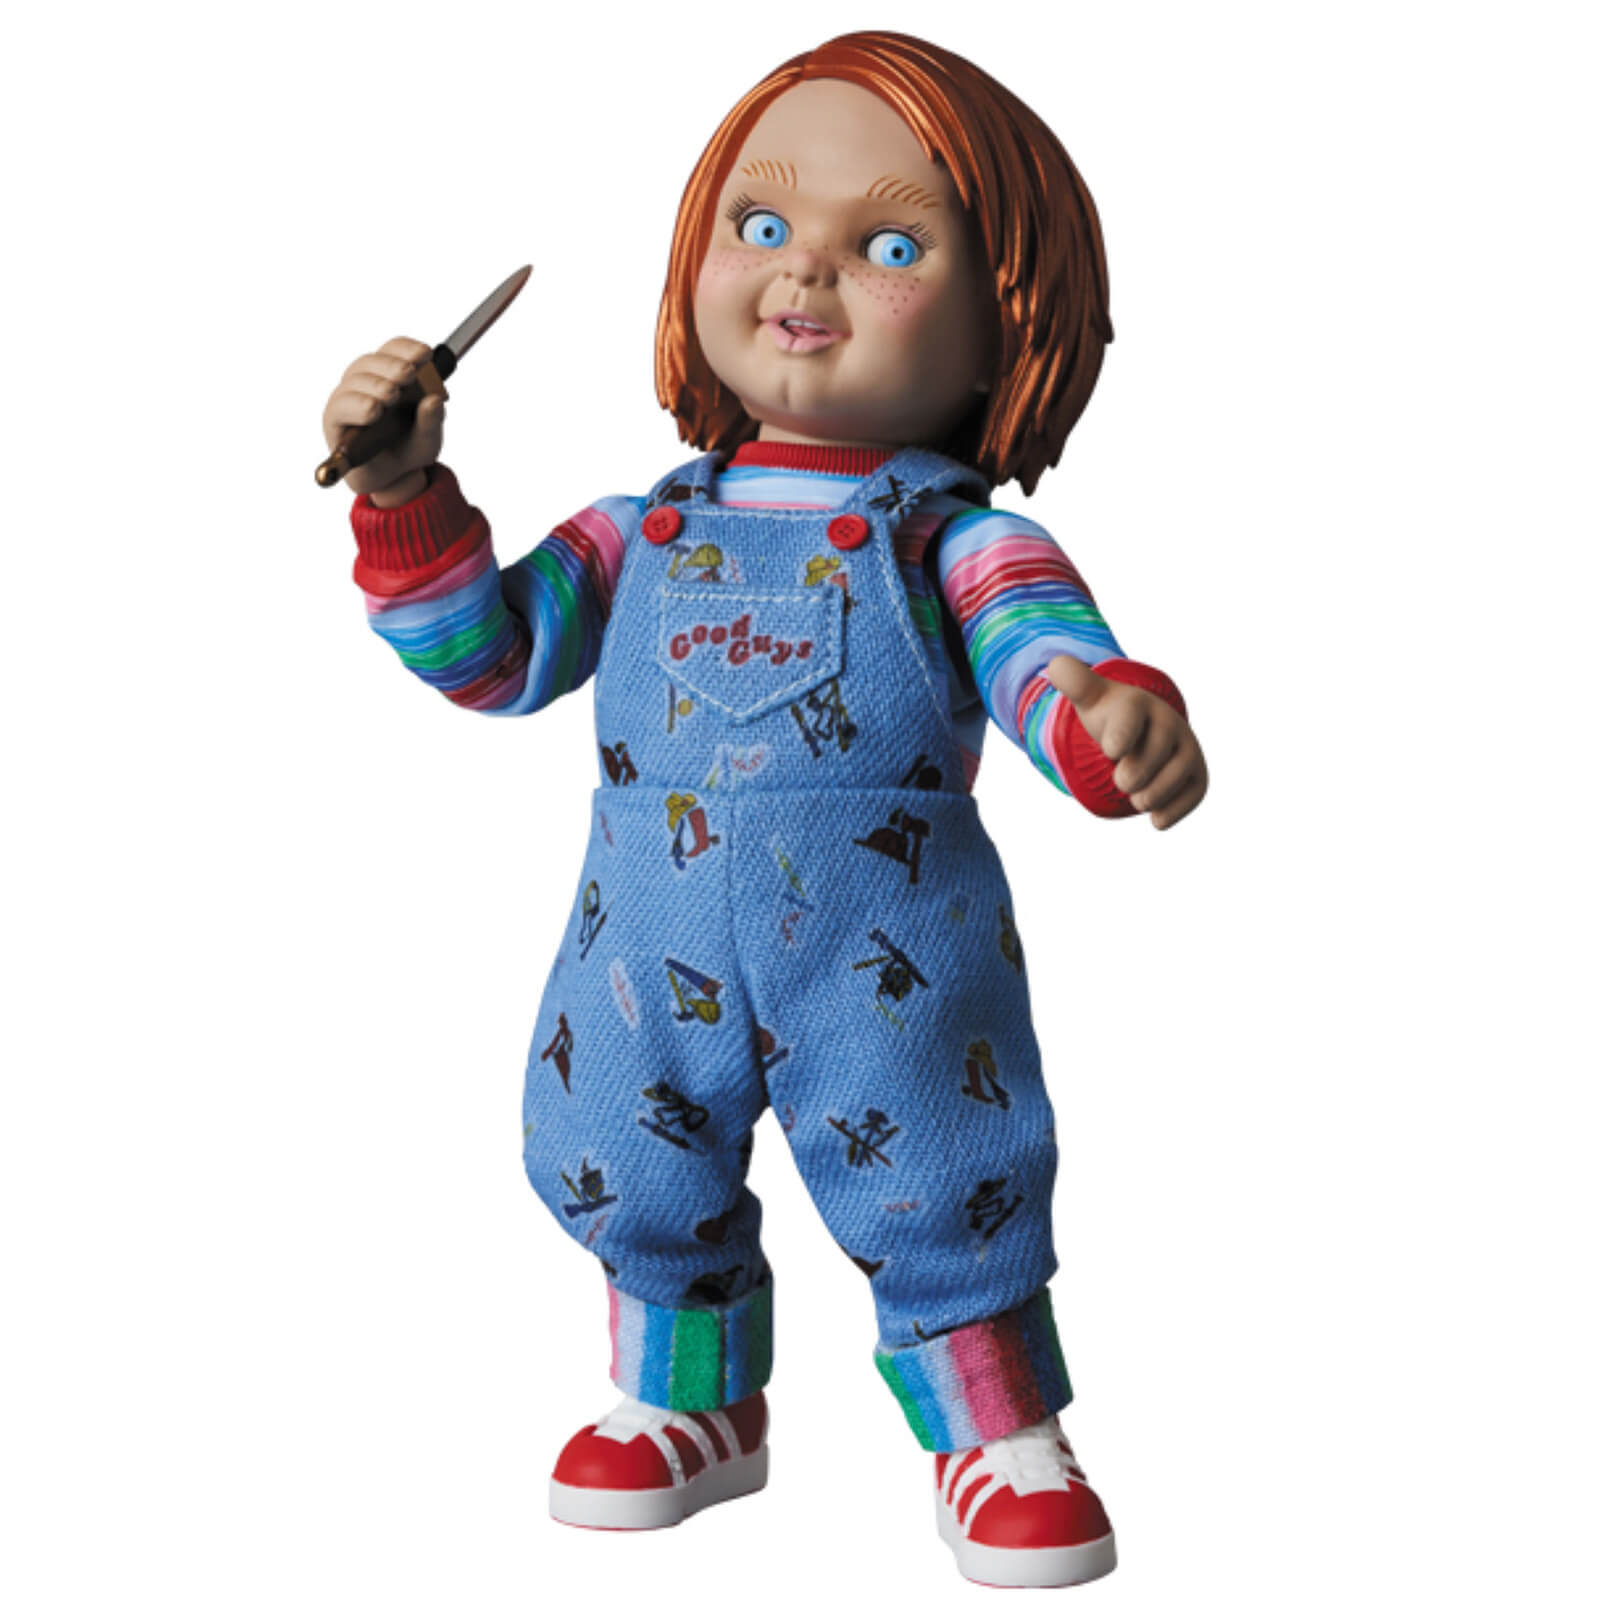 Medicom Child's Play 2 MAFEX Action Figure - Good Guy Doll